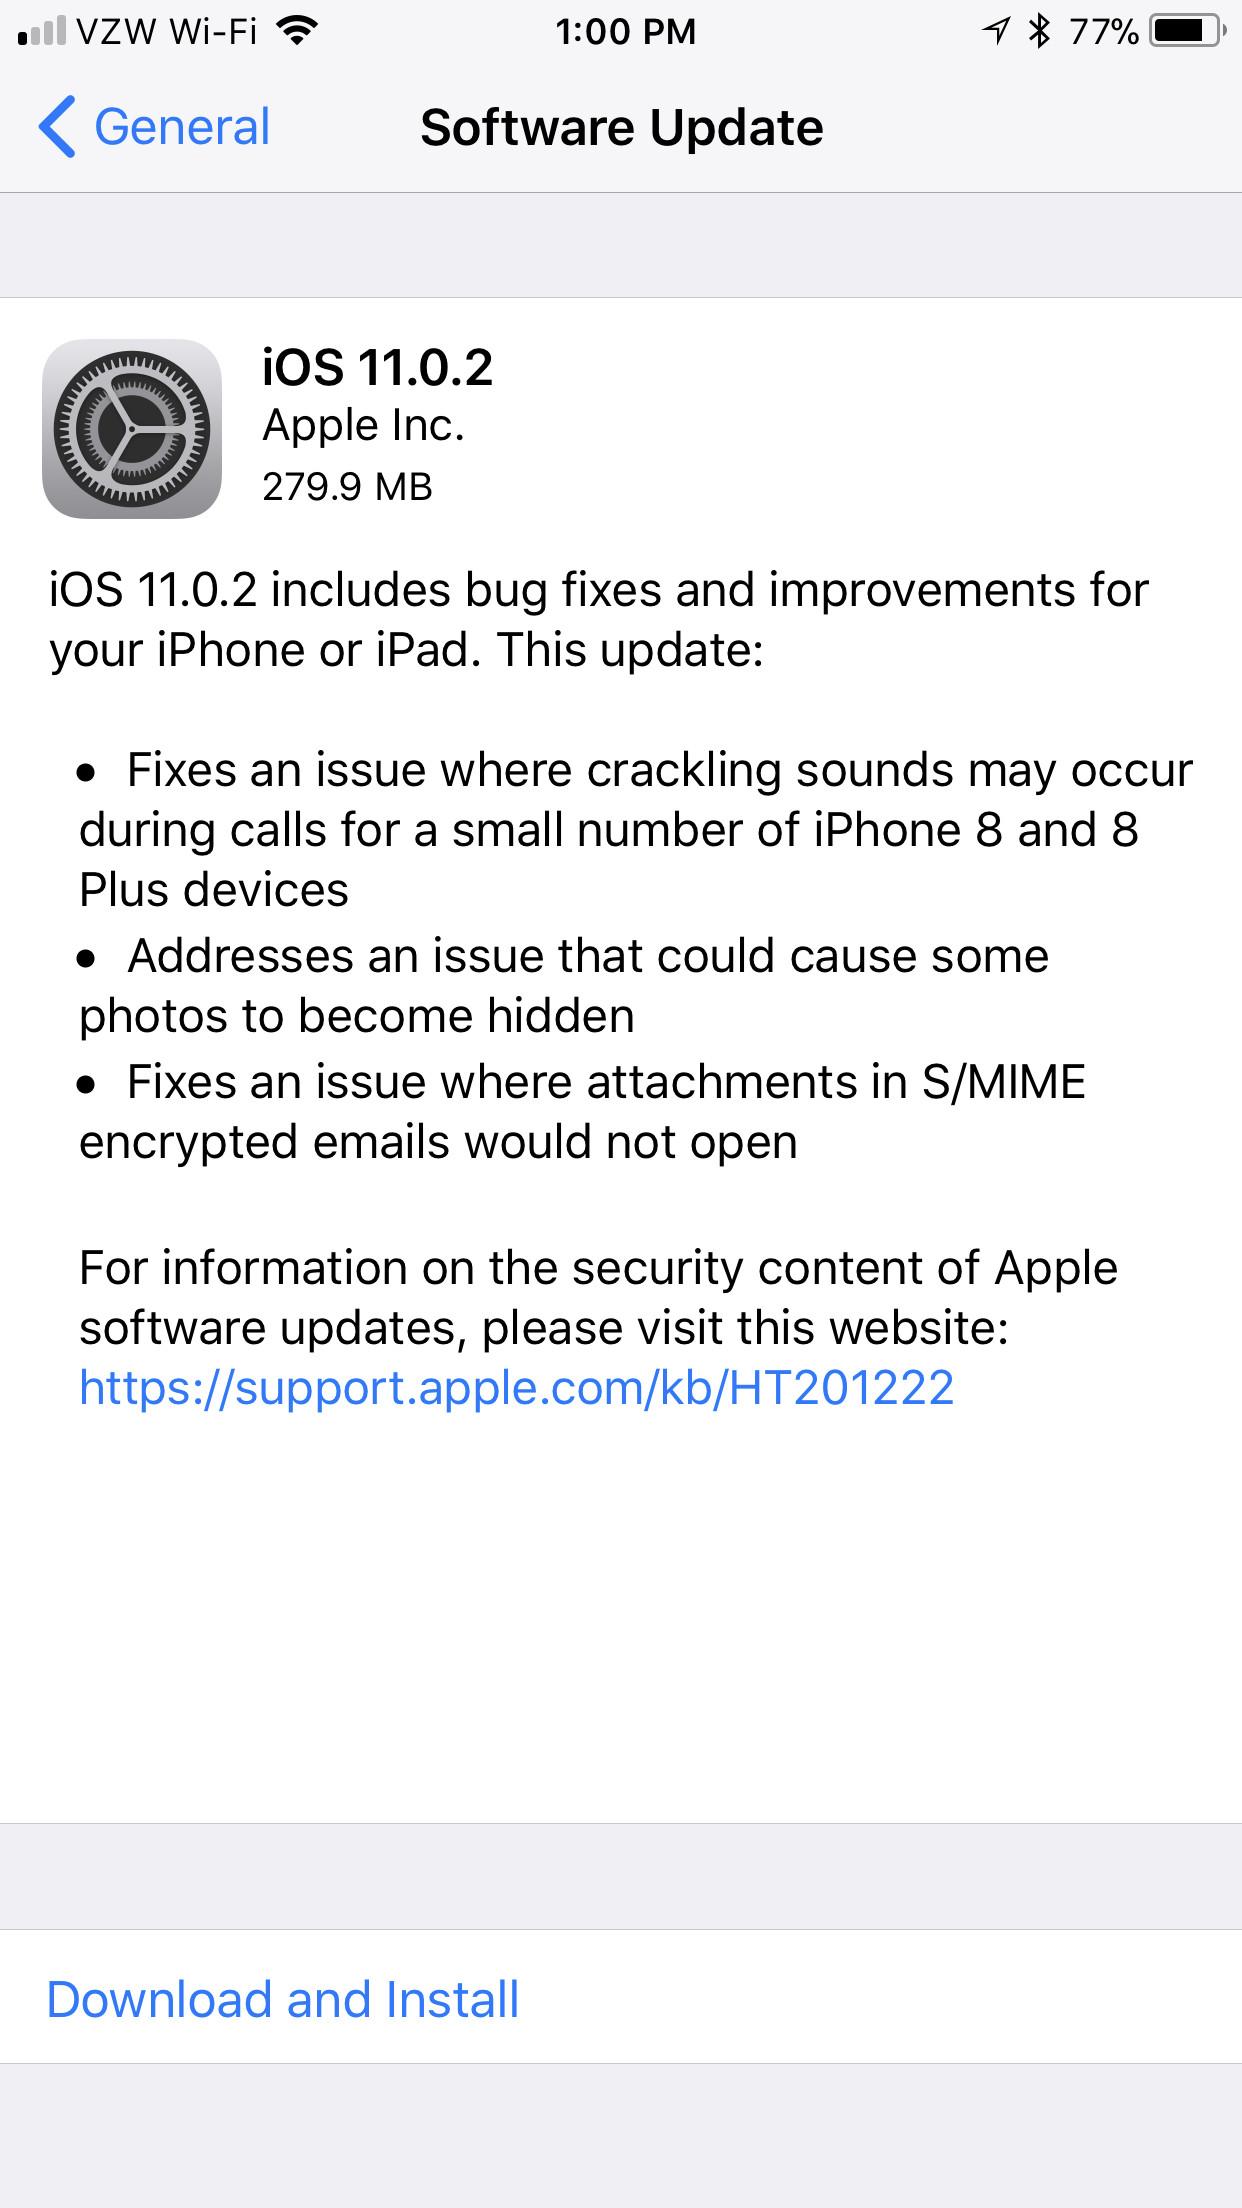 Apple Releases iOS 11.0.2 As It Claims to Have Fixed 'Crackling' Heard On Calls  